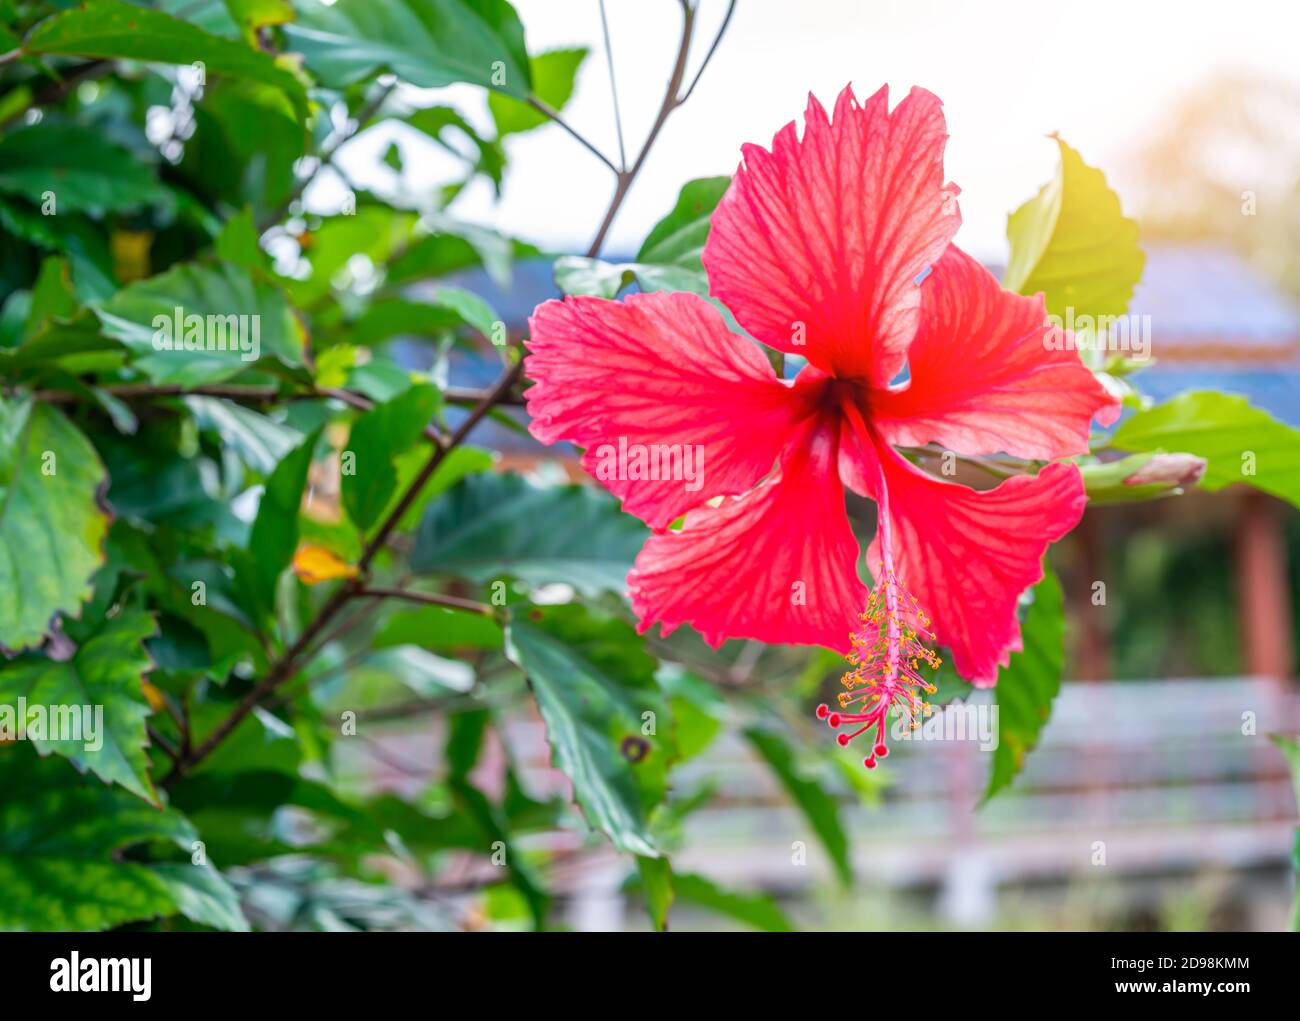 Hibiscus flower (disambiguation),  Hibiscus syriacus, and Hibiscus rosa-sinensis, flower on blurred green nature background, Abstract flower blurry ba Stock Photo